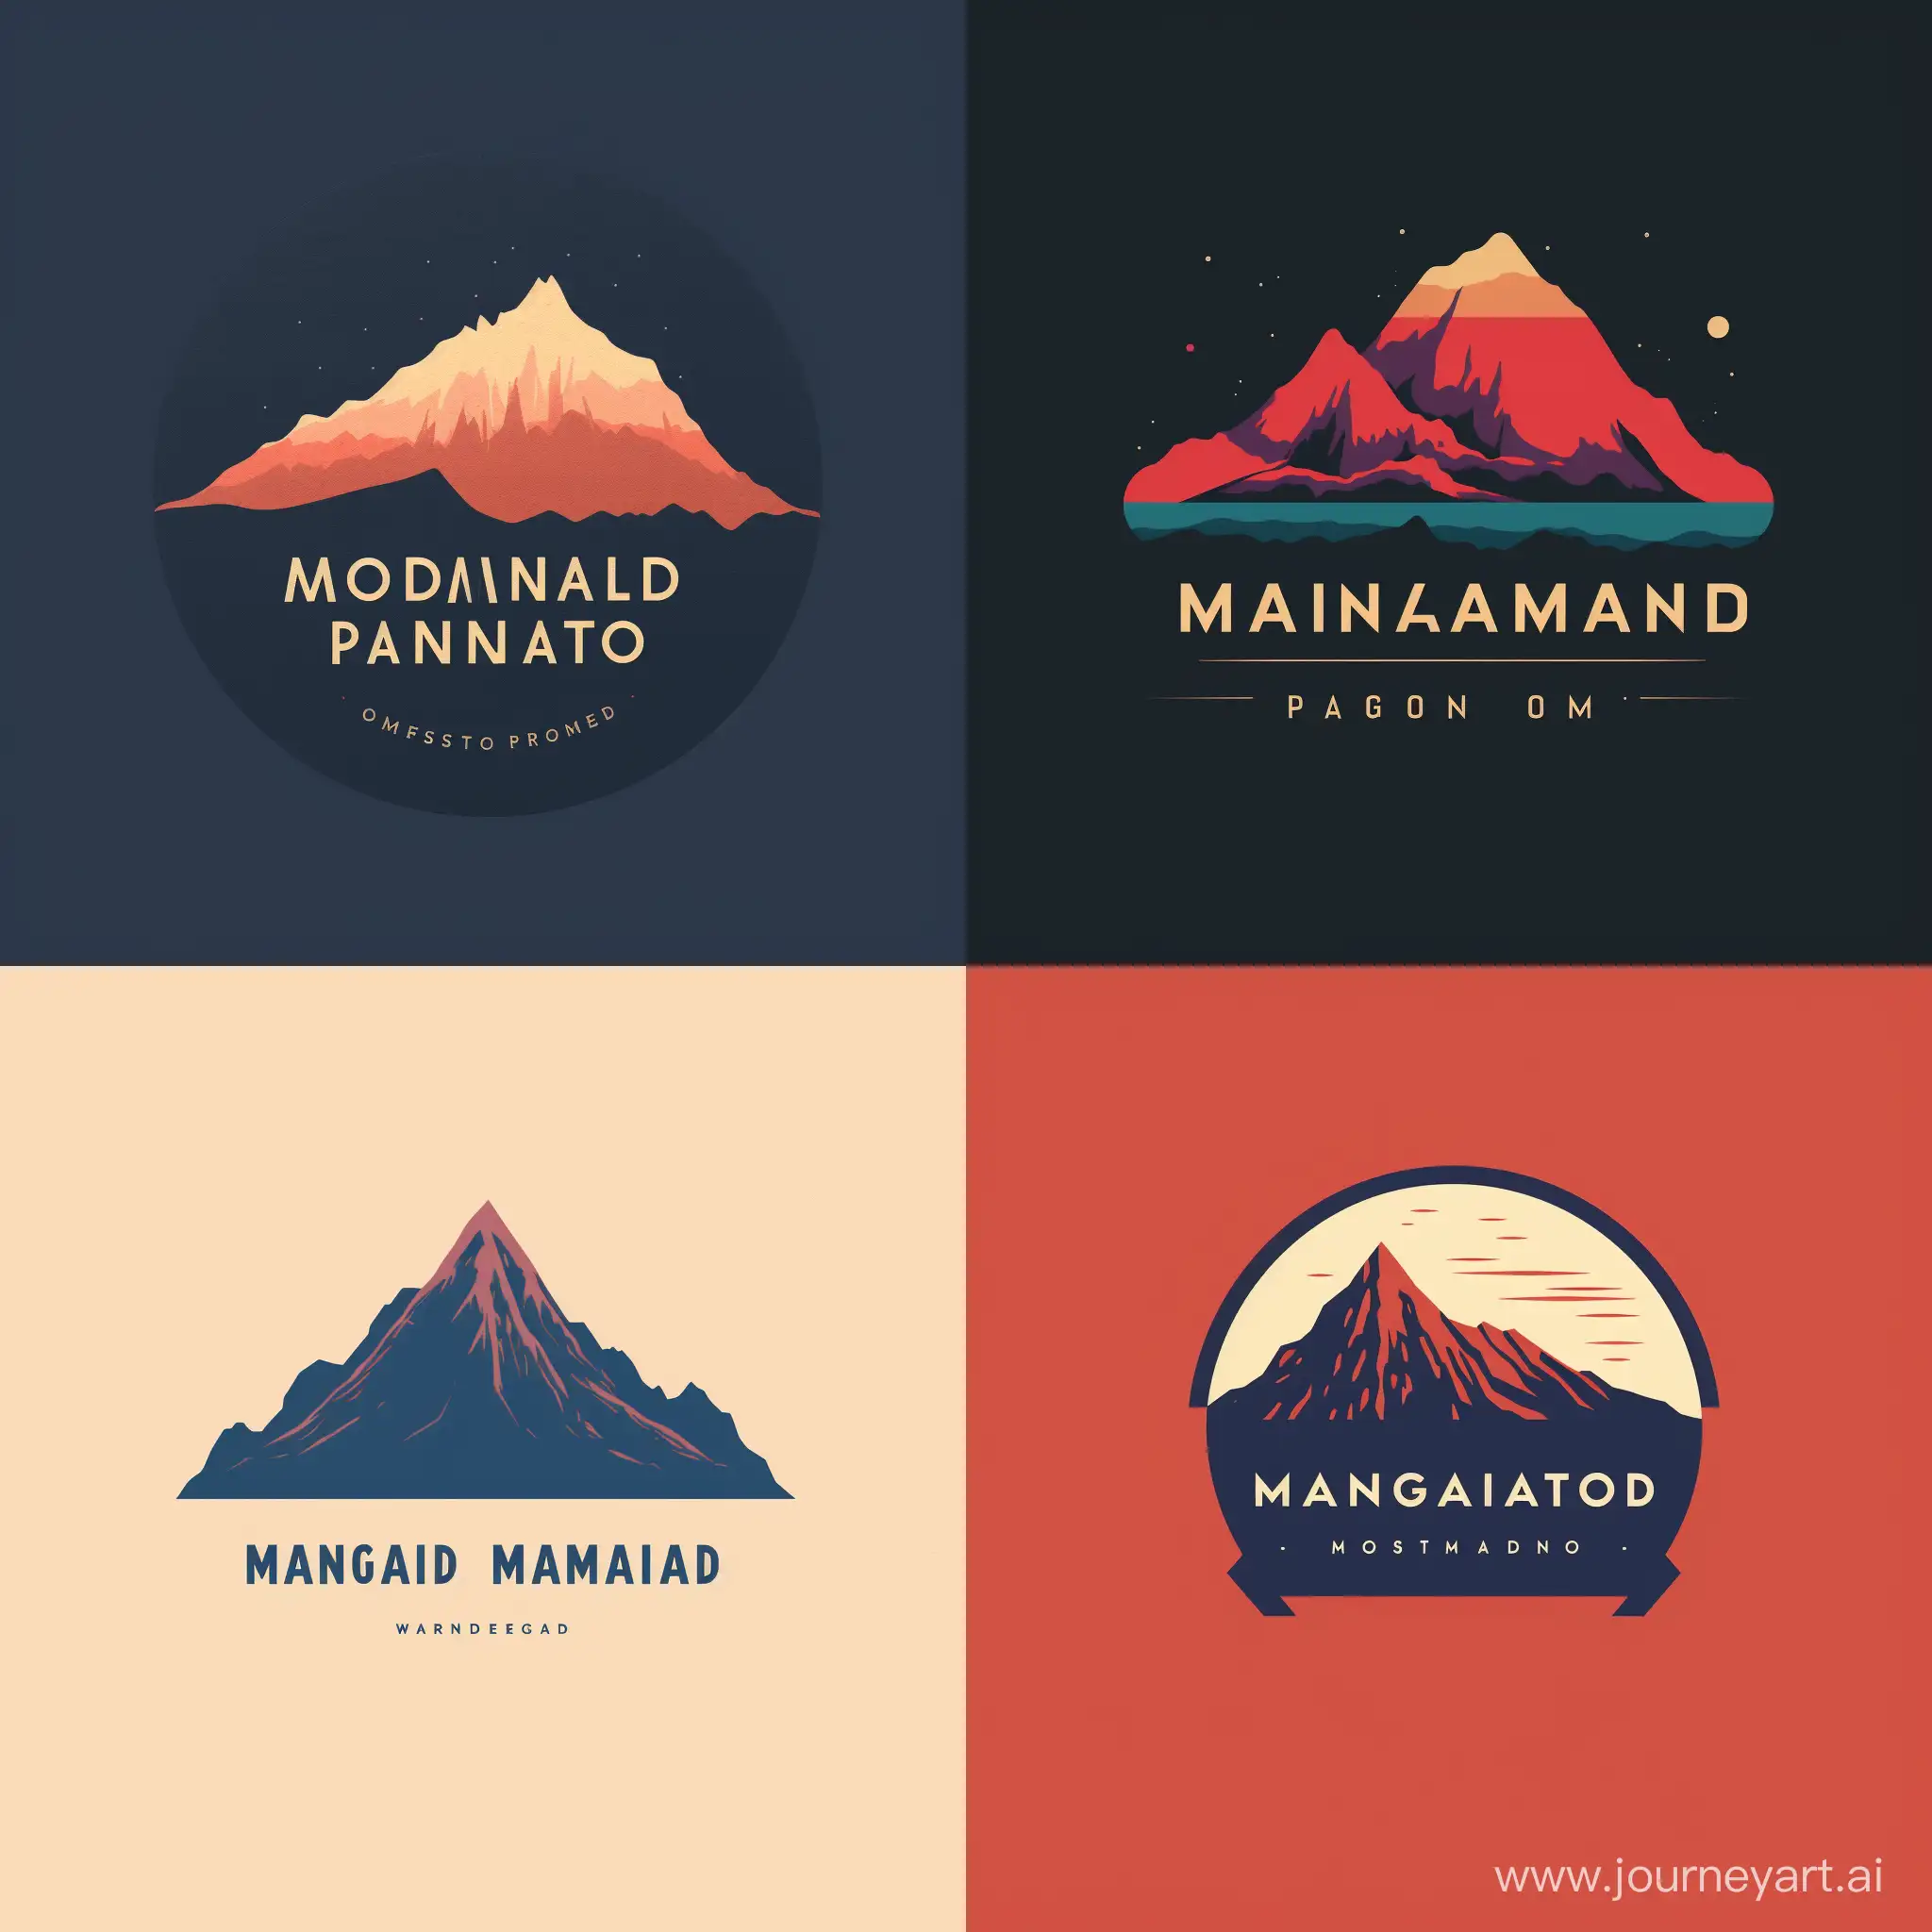 Minimal logo of a tour guide, a volcano, volcano palette, word "Magmando" embroided, Patagonia logo style, lava visible